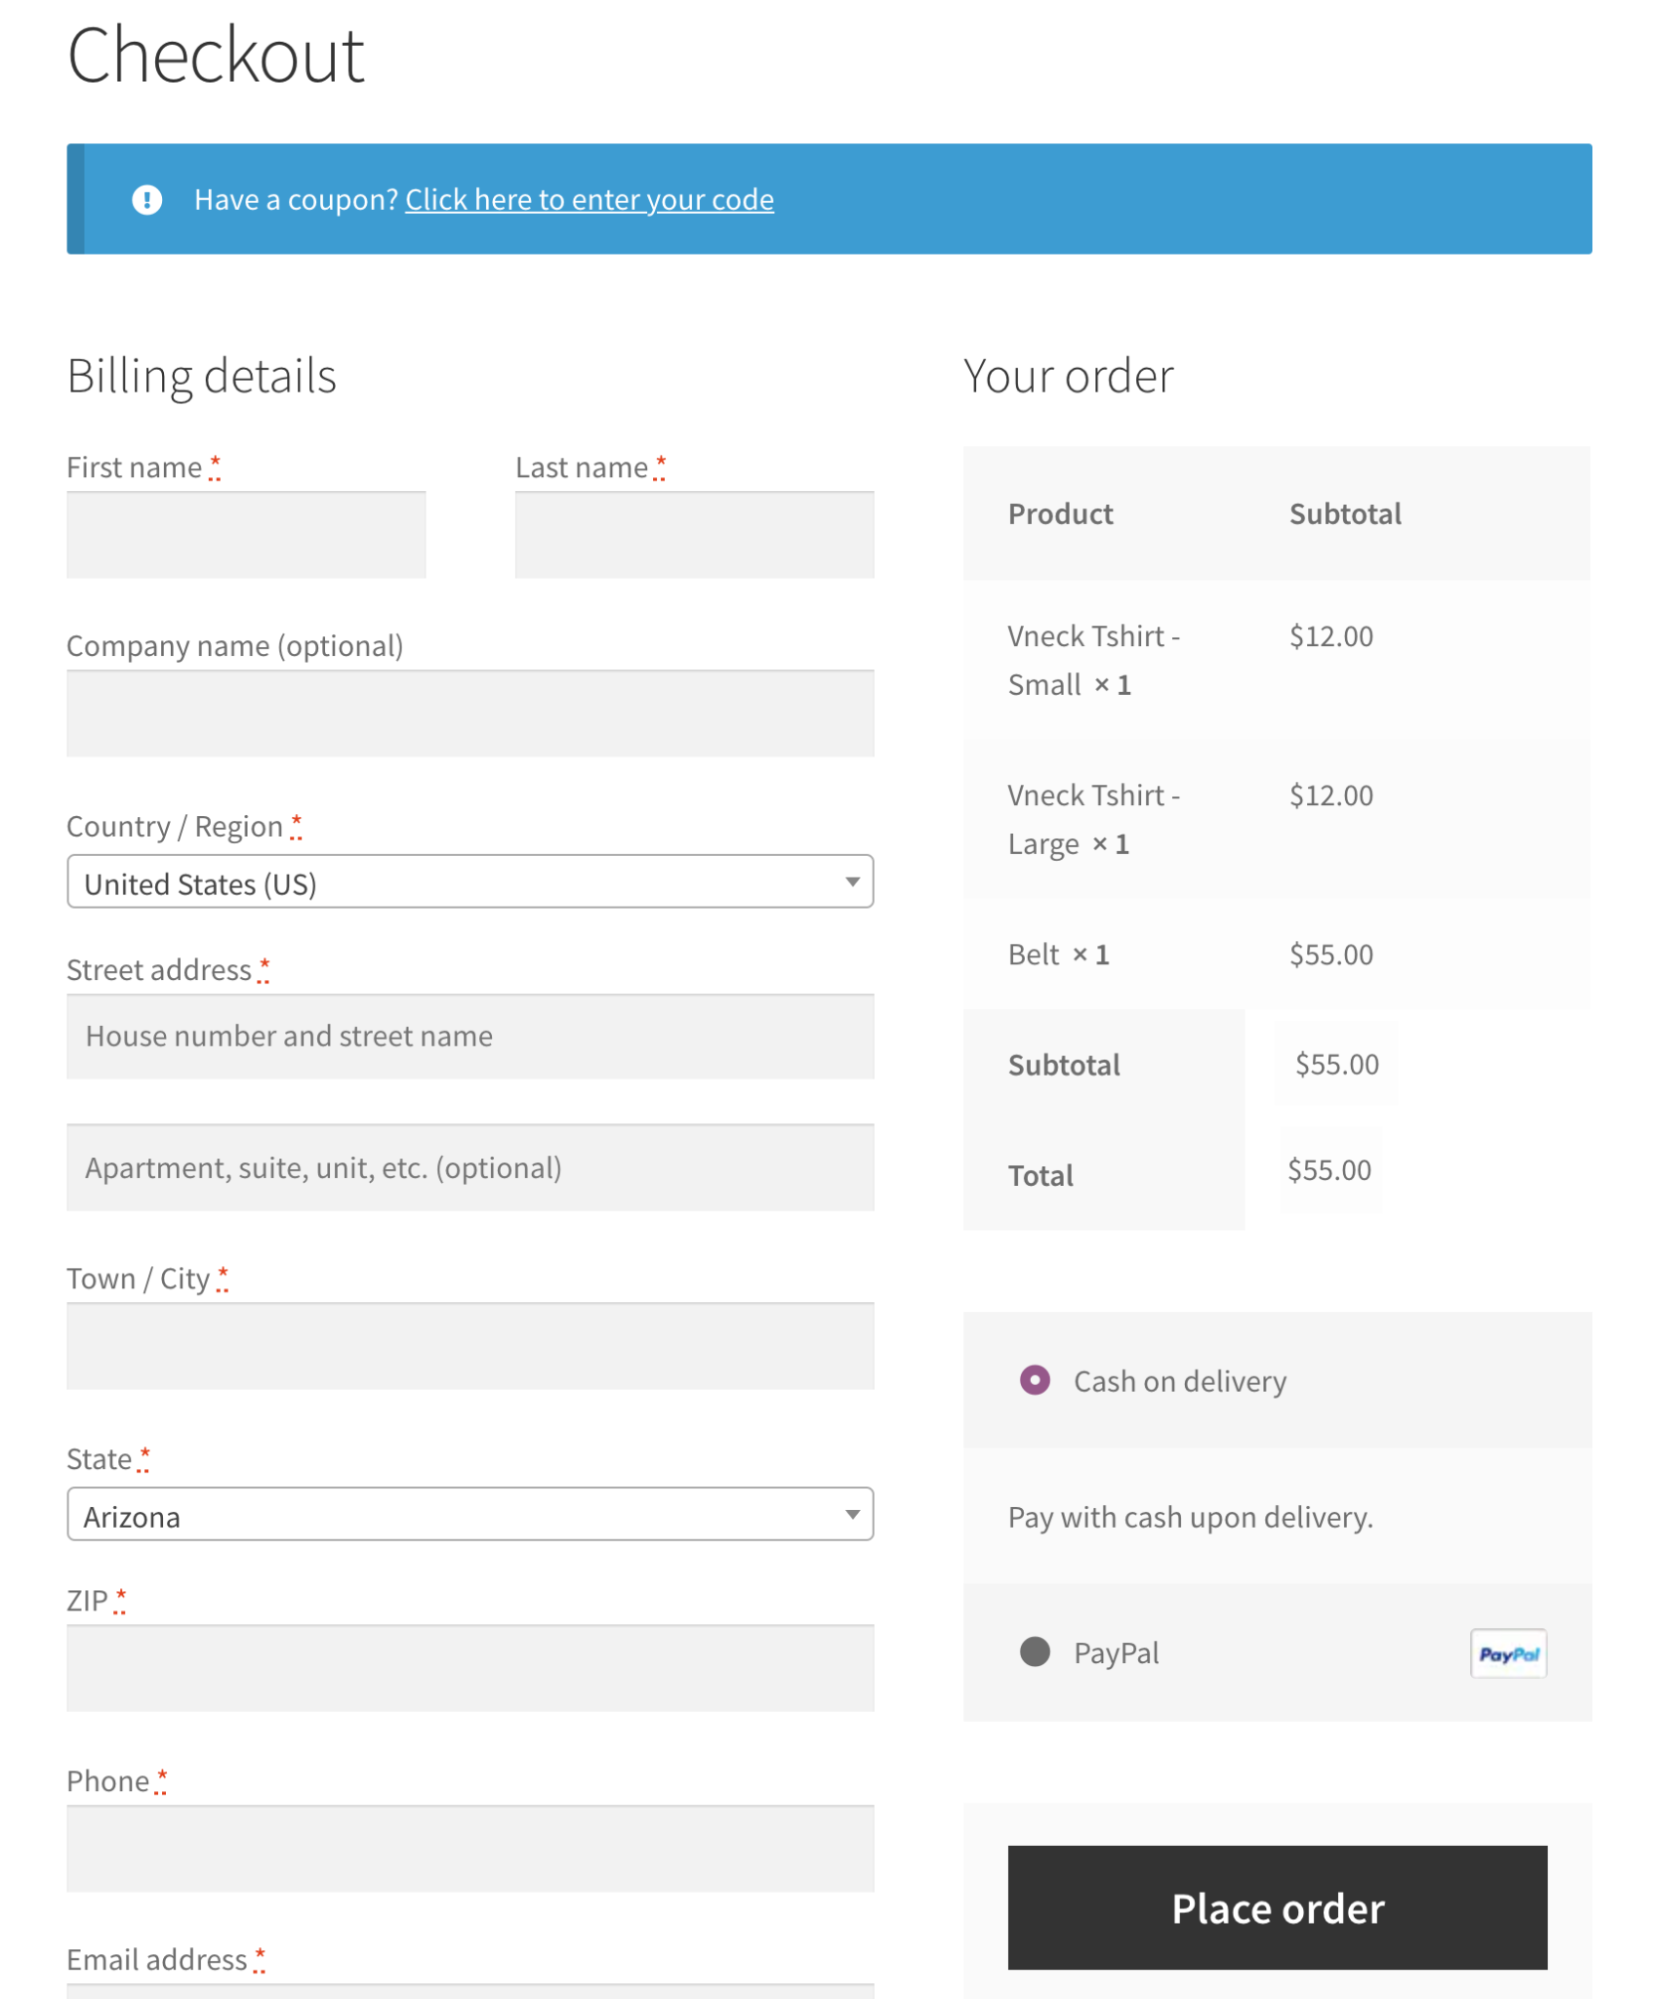 How to Customize WooCommerce Checkout Page - A Detailed Guide